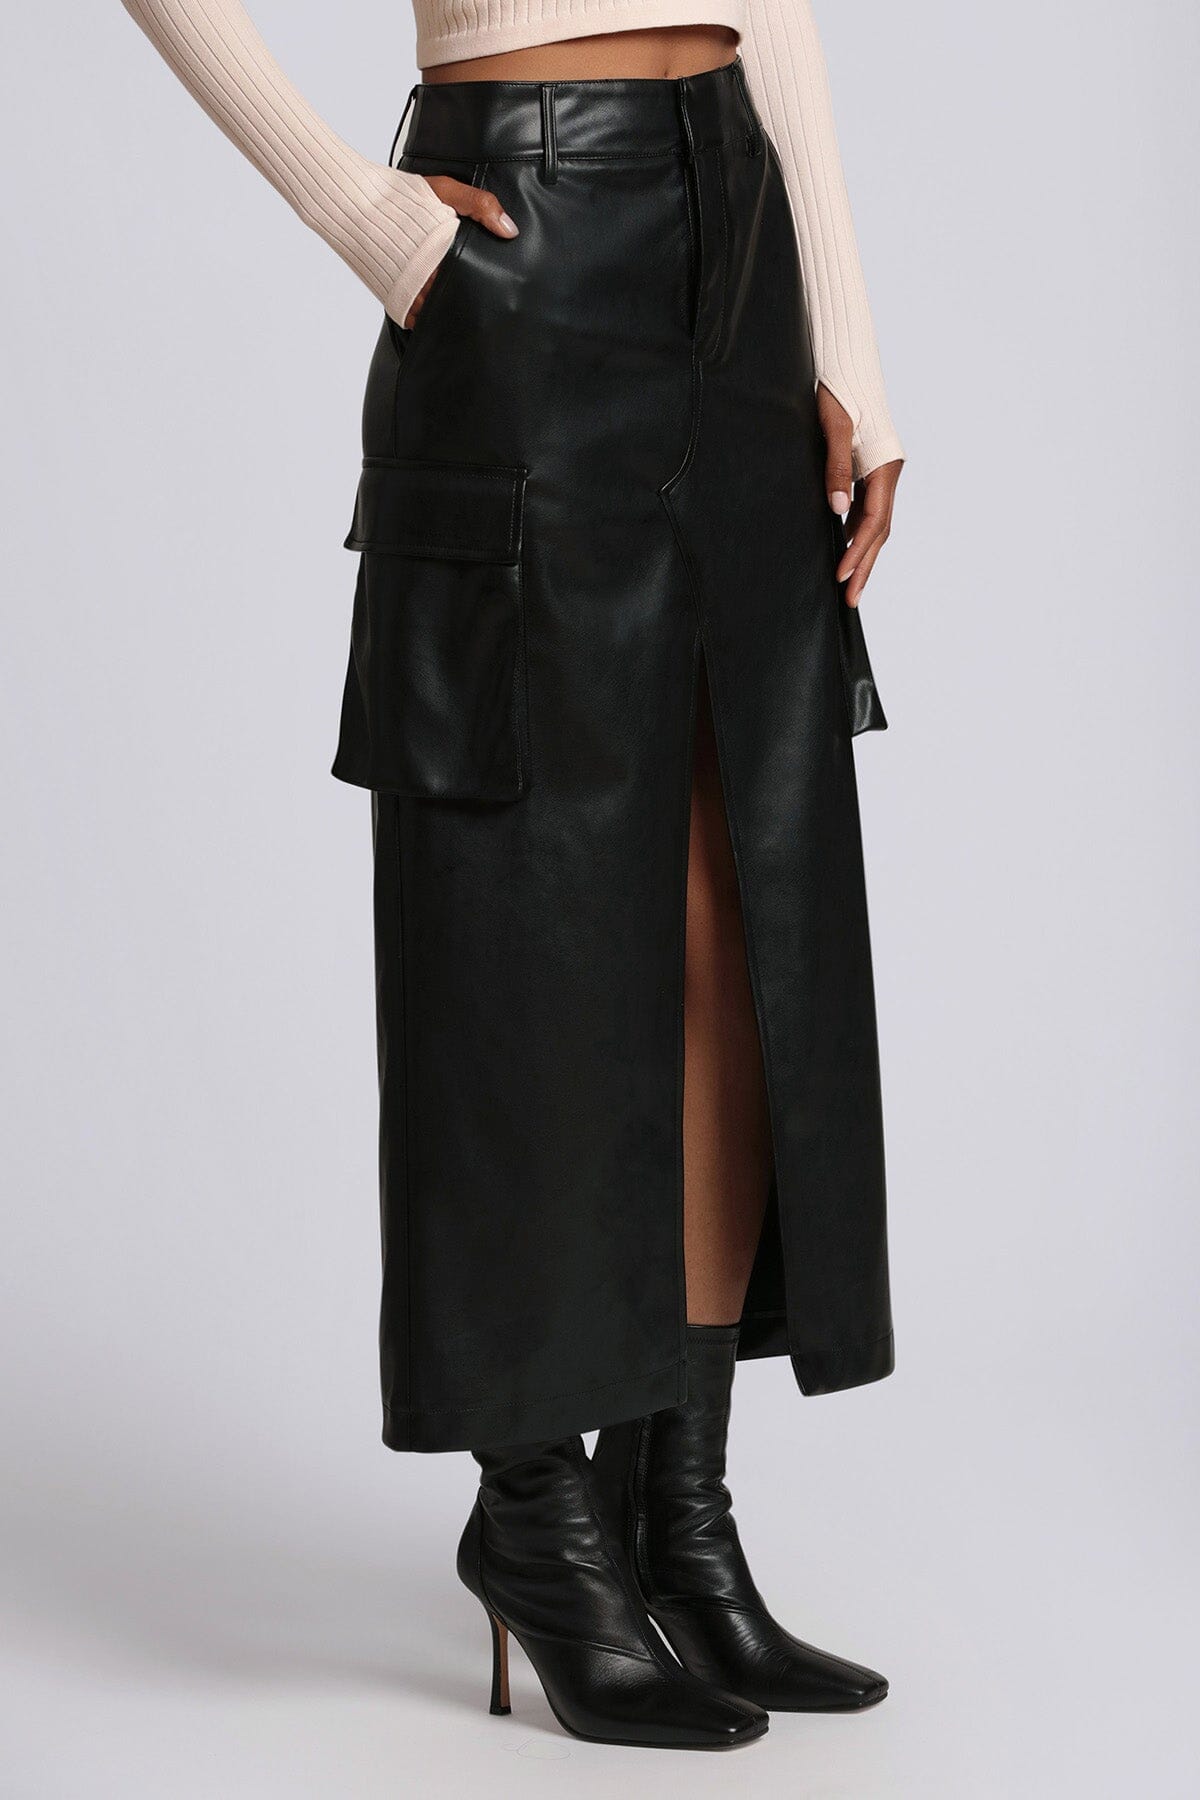 black faux ever leather maxi cargo skirt - women's figure flattering designer fashion day to night skirts 